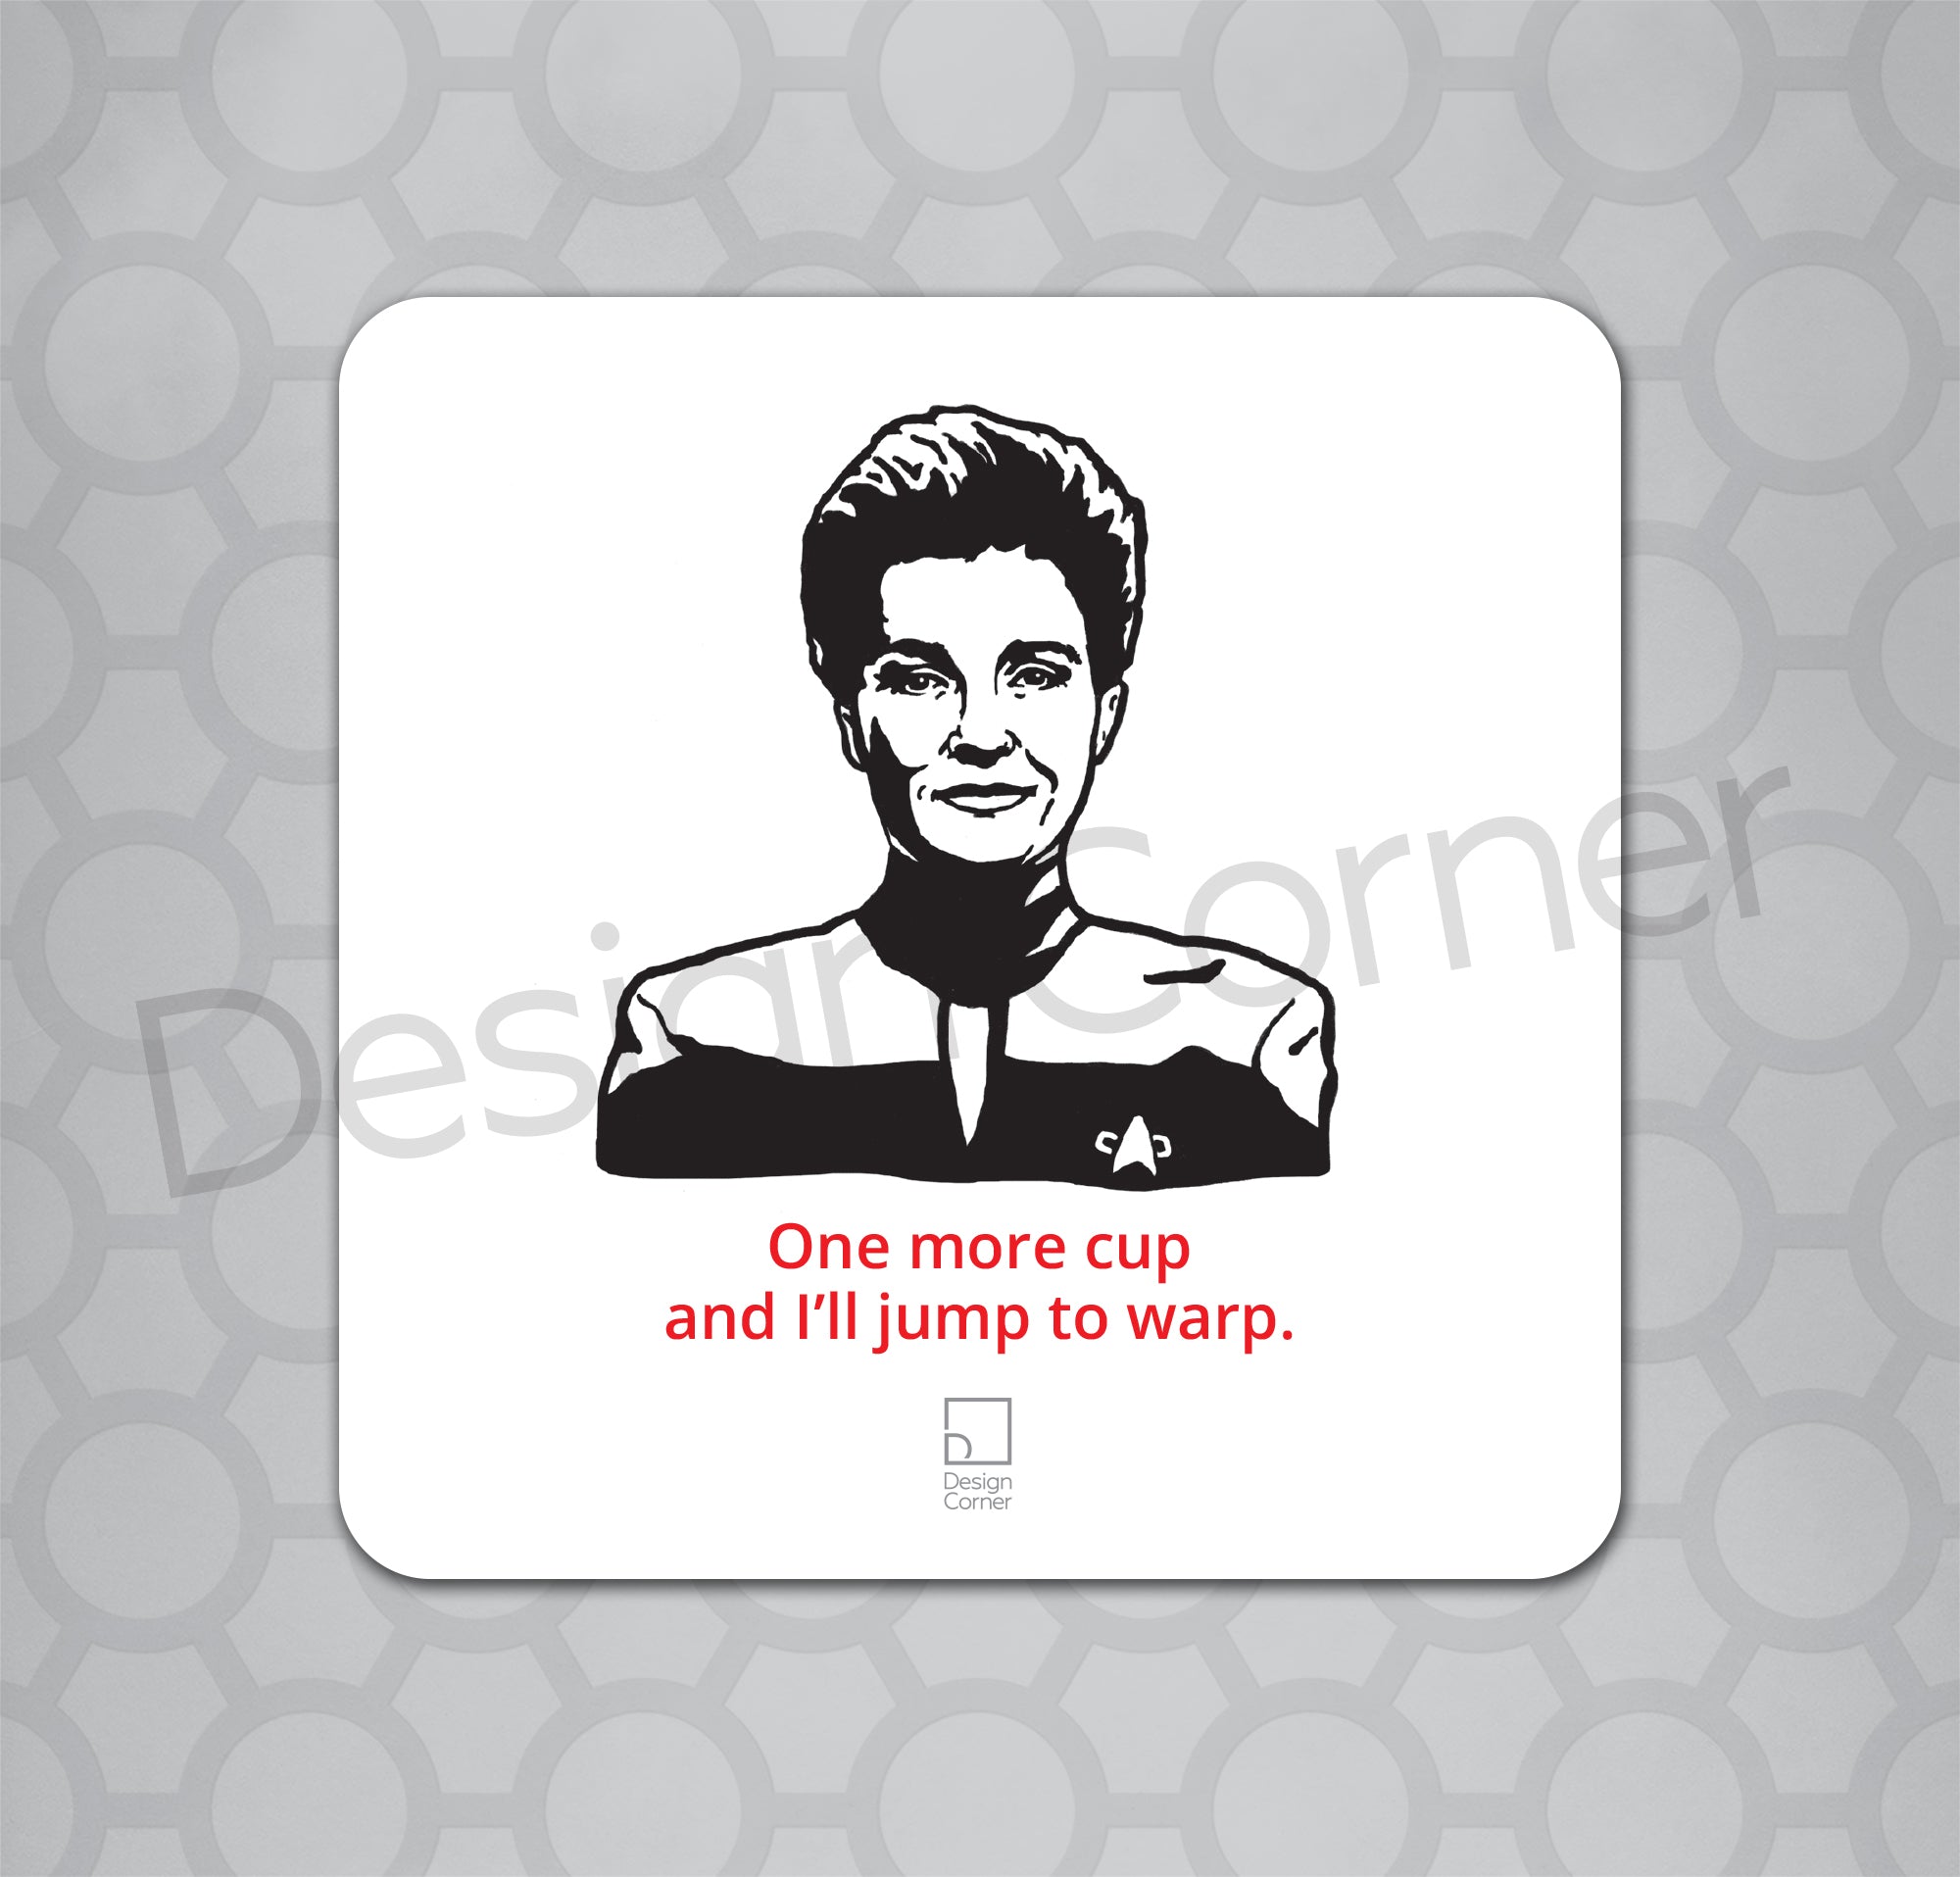 Illustration of Star Trek's Janeway on a coaster with caption "One more cup and I'll jump to warp."